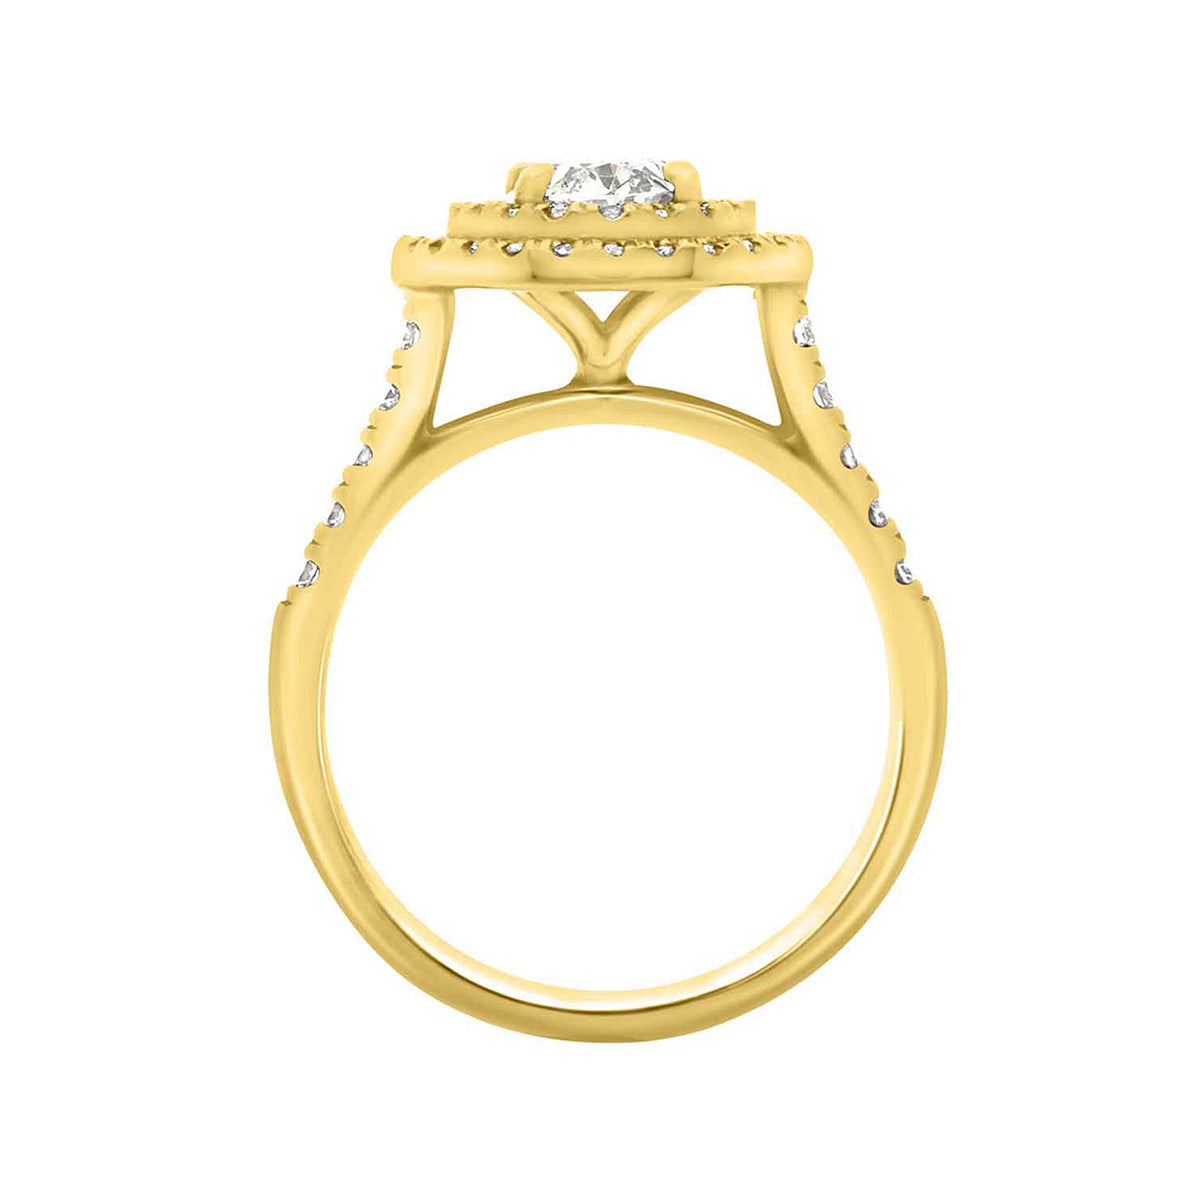 Double Halo Oval Engagement Ring In yellow gold in an upright position